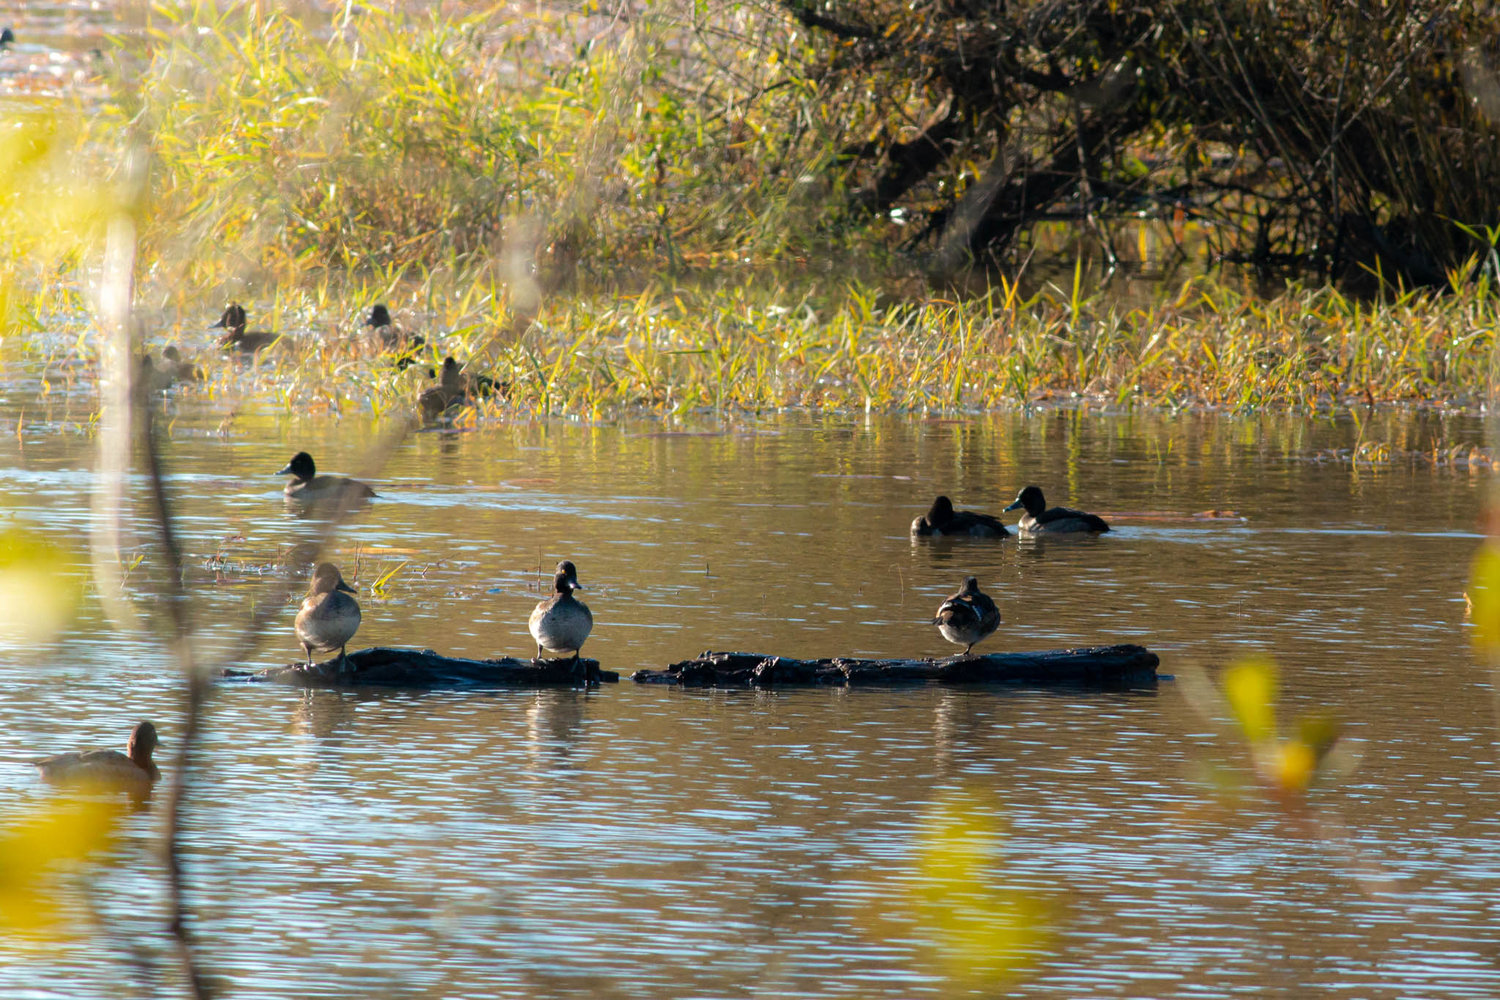 Chronicle staffer Liz Hill captured these photos of waterfowl along the Willapa Hills Trail on Saturday morning.